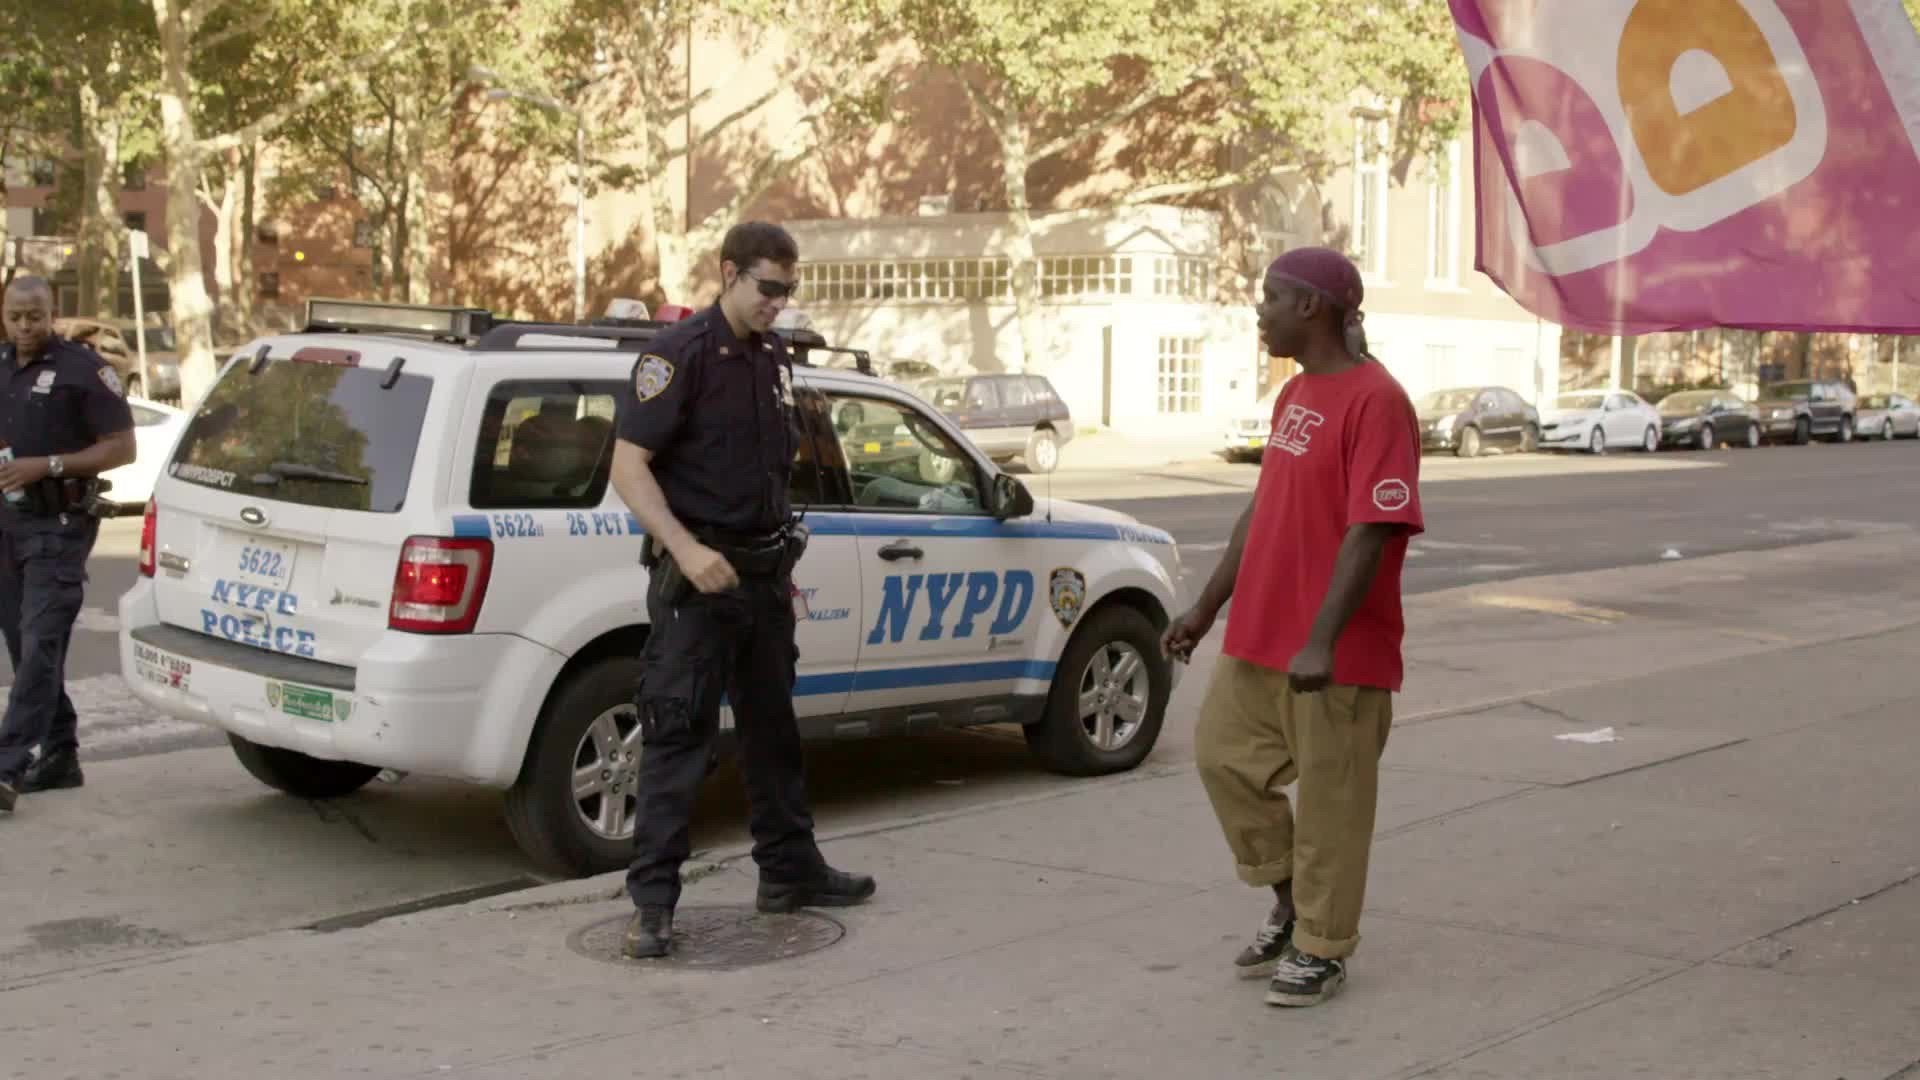 NYPD police officer doesn't want to shake man's hand, in this awkward moment of either germaphobia or racism. Summer day in NYC.